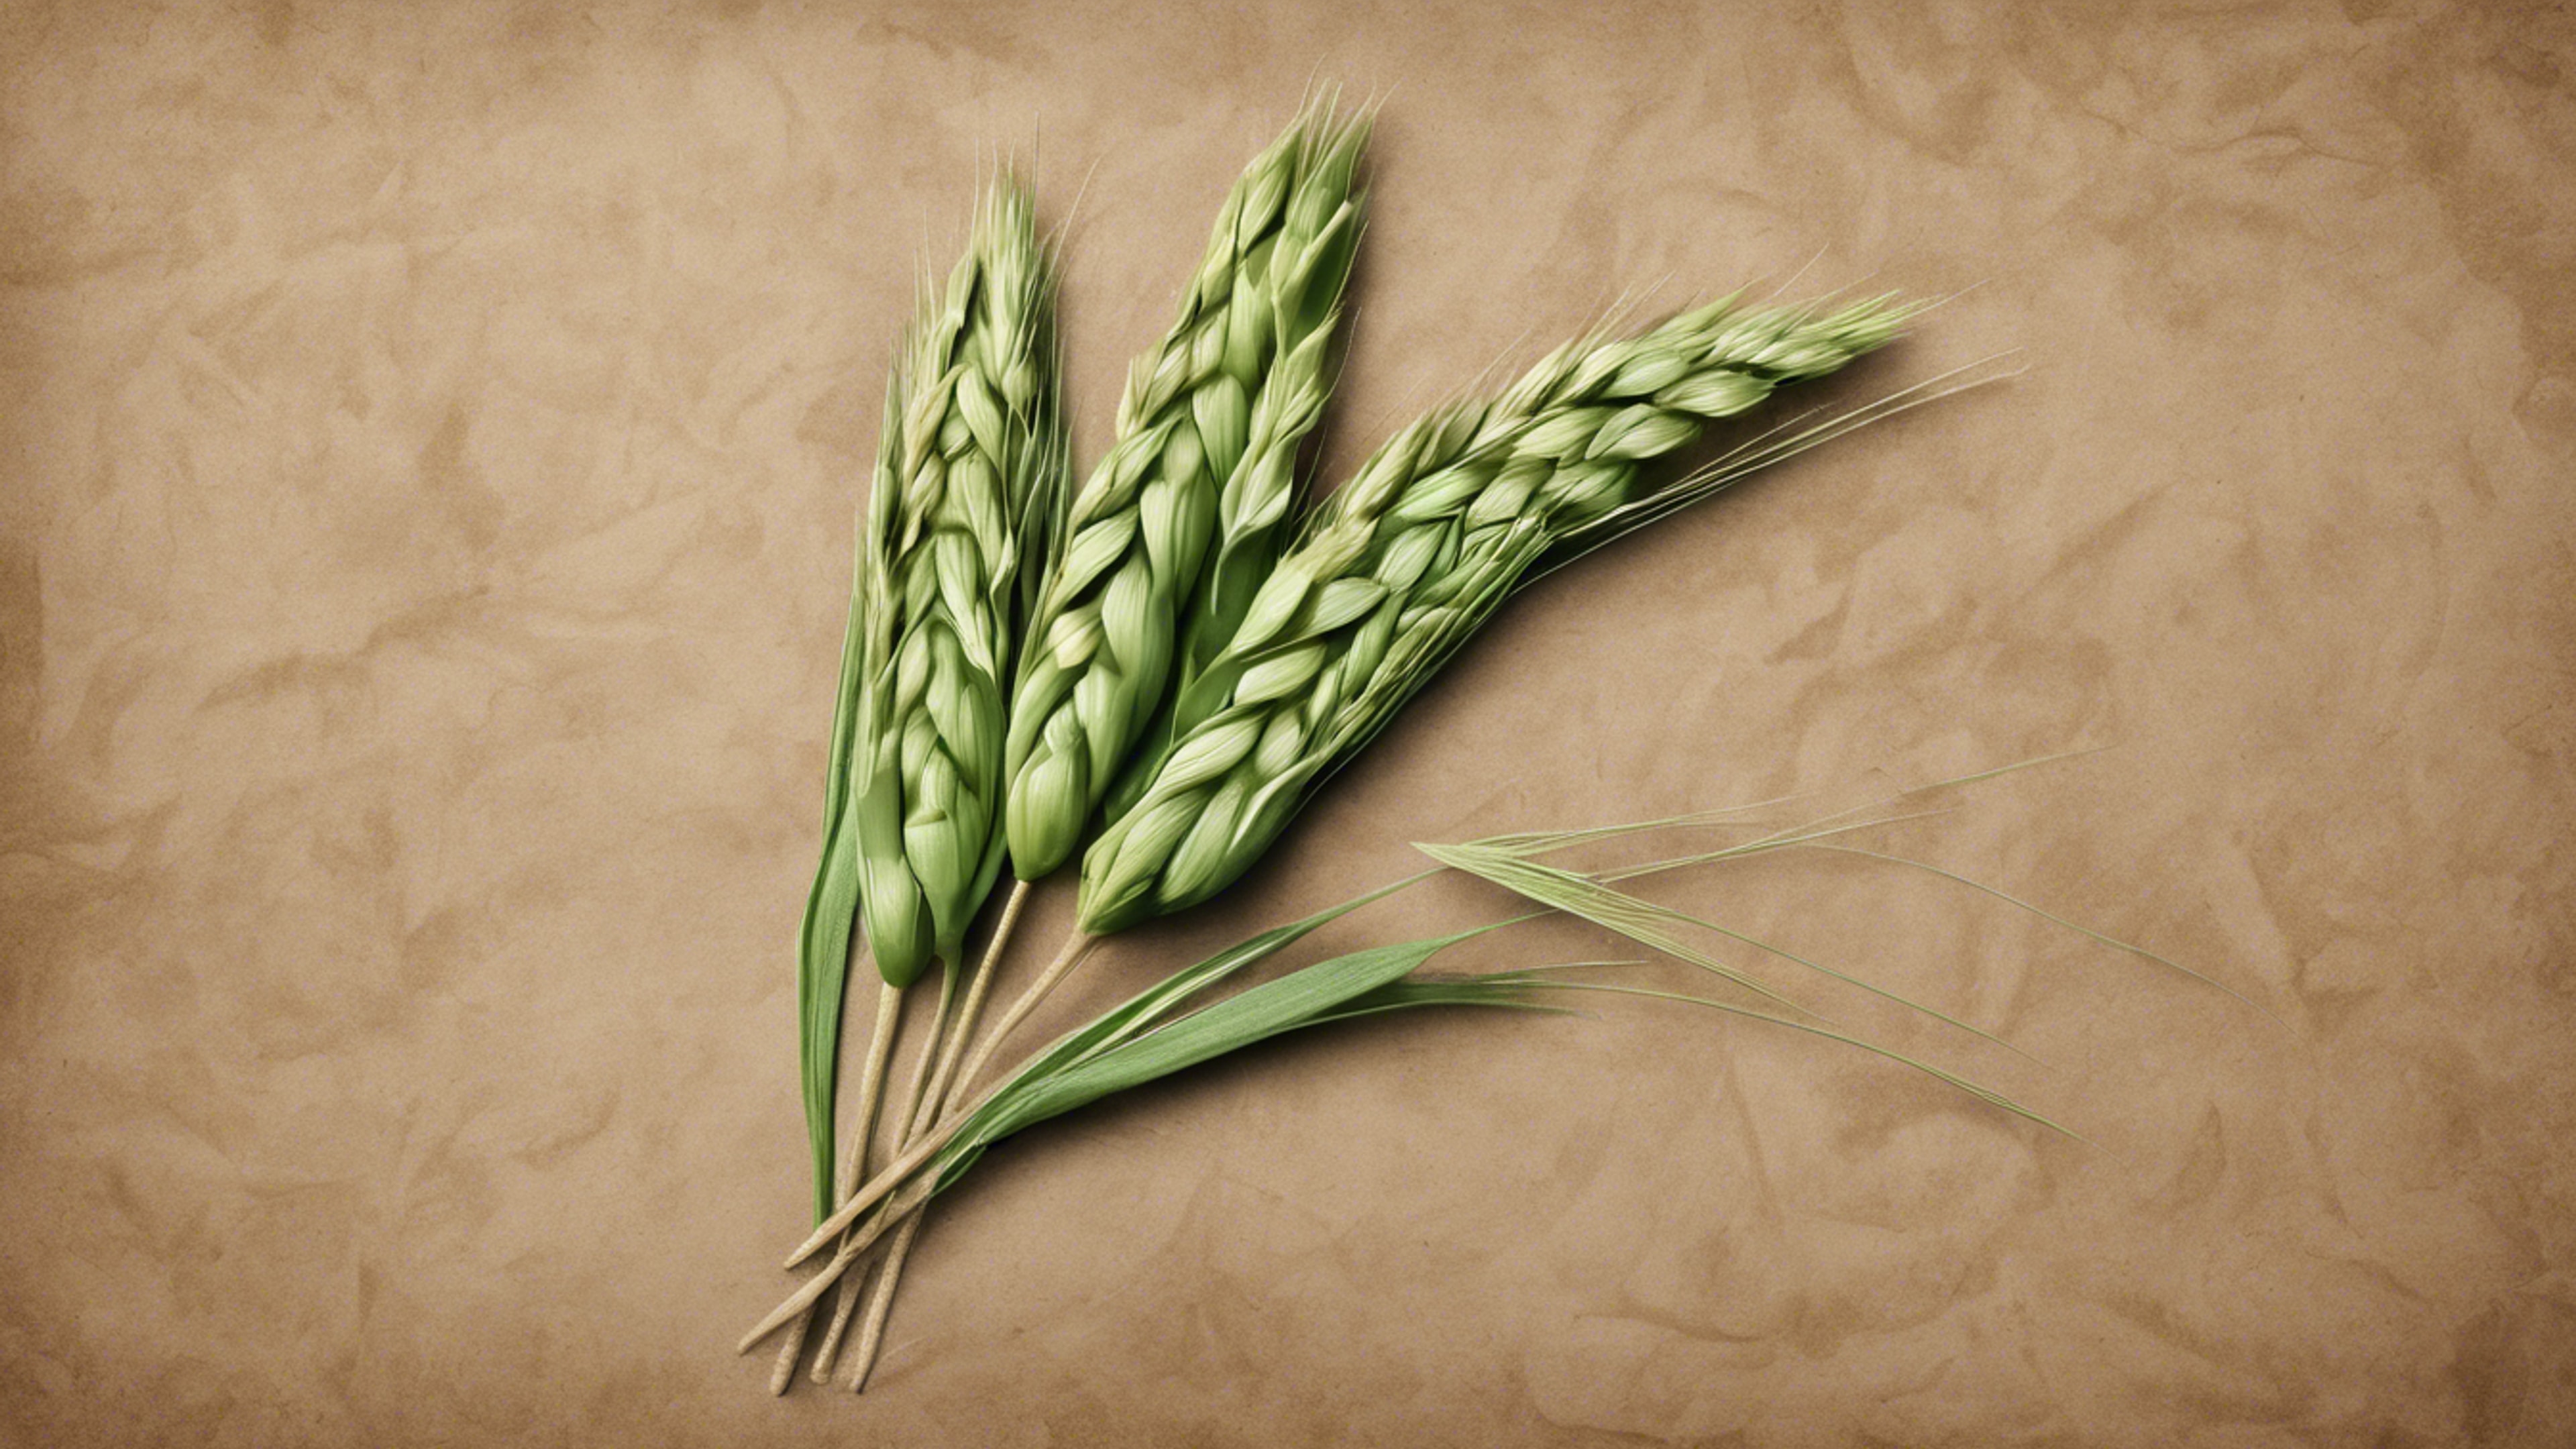 A detailed botanical illustration of a stalk of green wheat against an aged brown paper background. Обои[958050ab552342b3bed0]